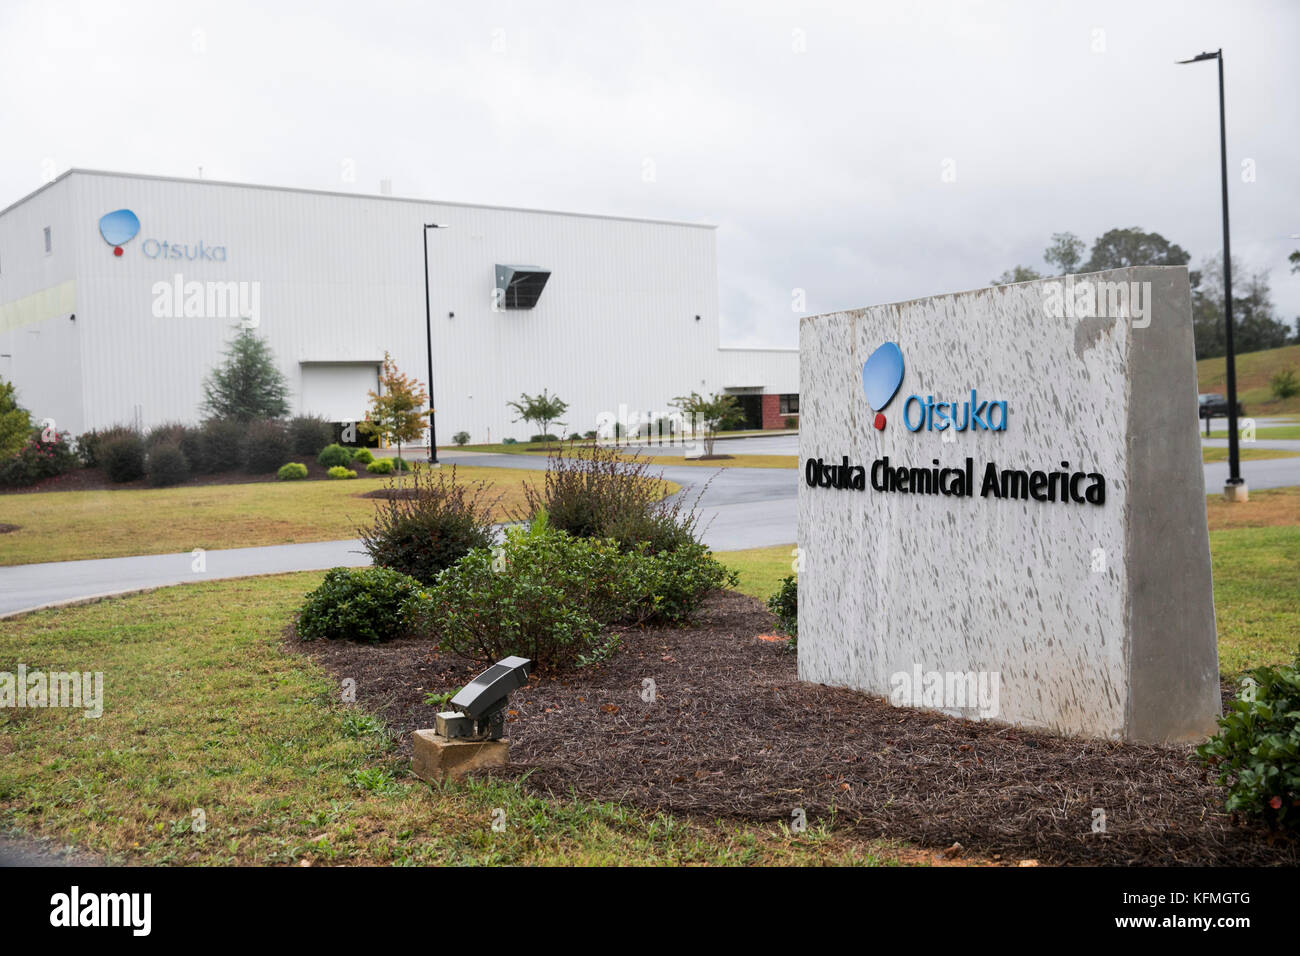 A logo sign outside of a facility occupied by Otsuka Chemical in Griffin, Georgia on October 8, 2017. Stock Photo